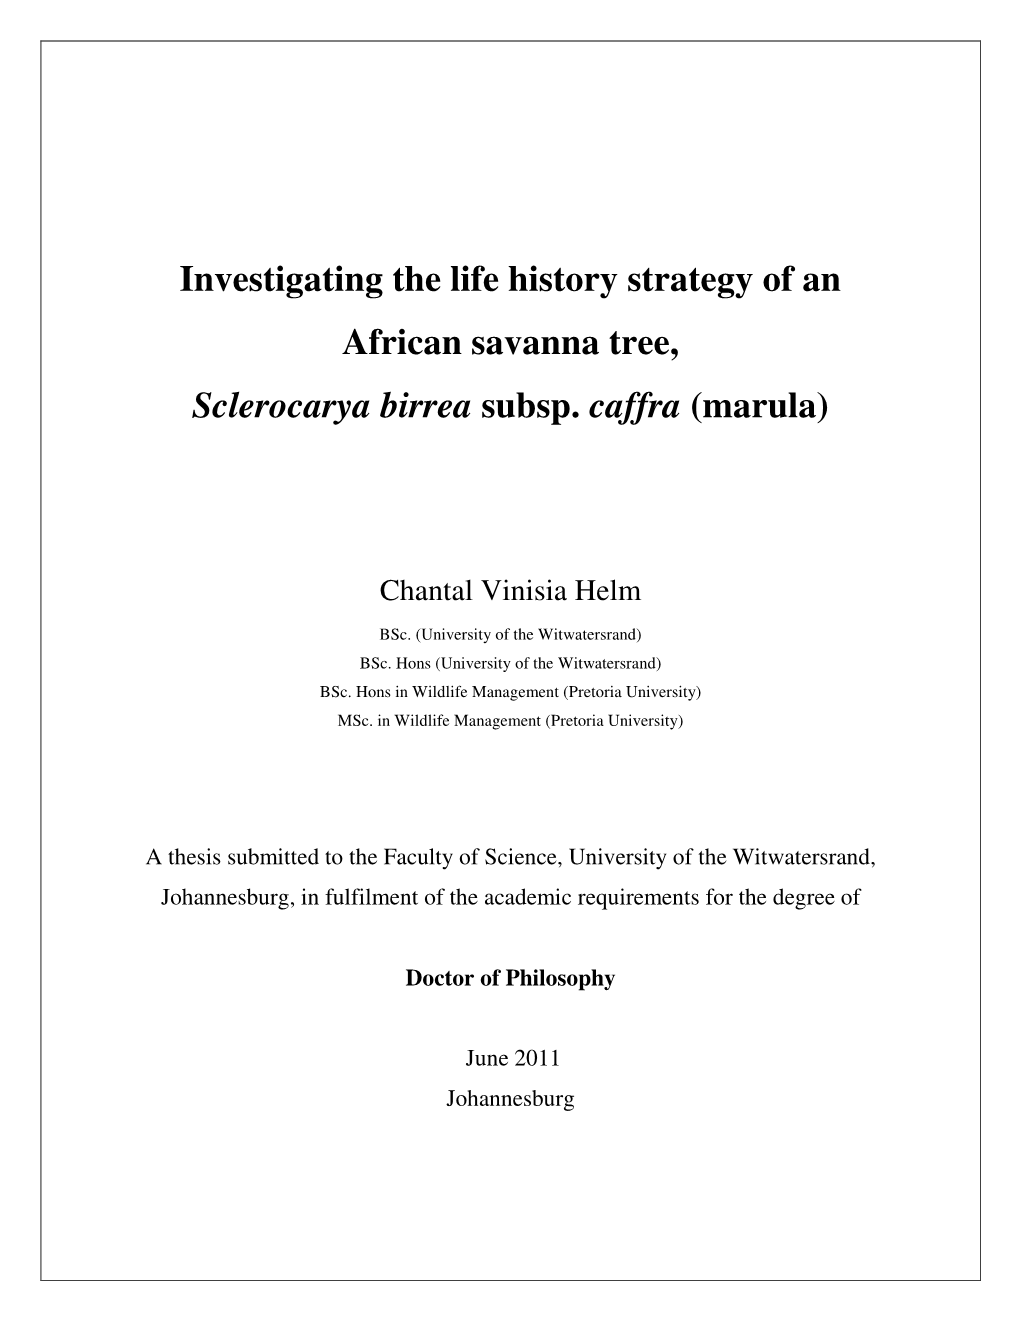 Investigating the Life History Strategy of an African Savanna Tree, Sclerocarya Birrea Subsp